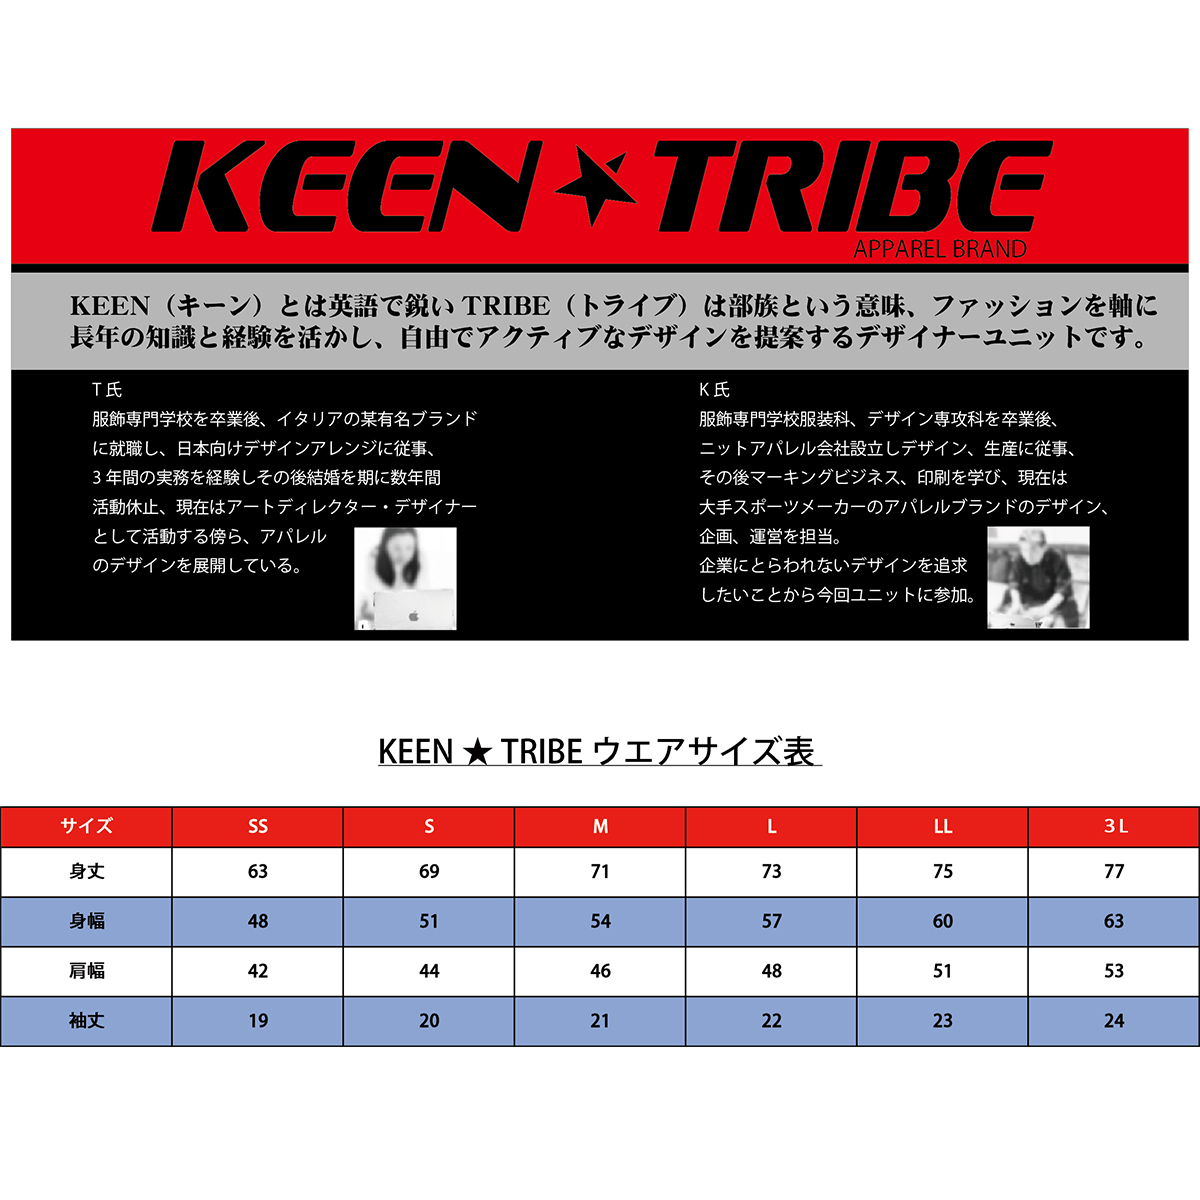 KEEN ★ TRIBE　KT-7(受注生産)